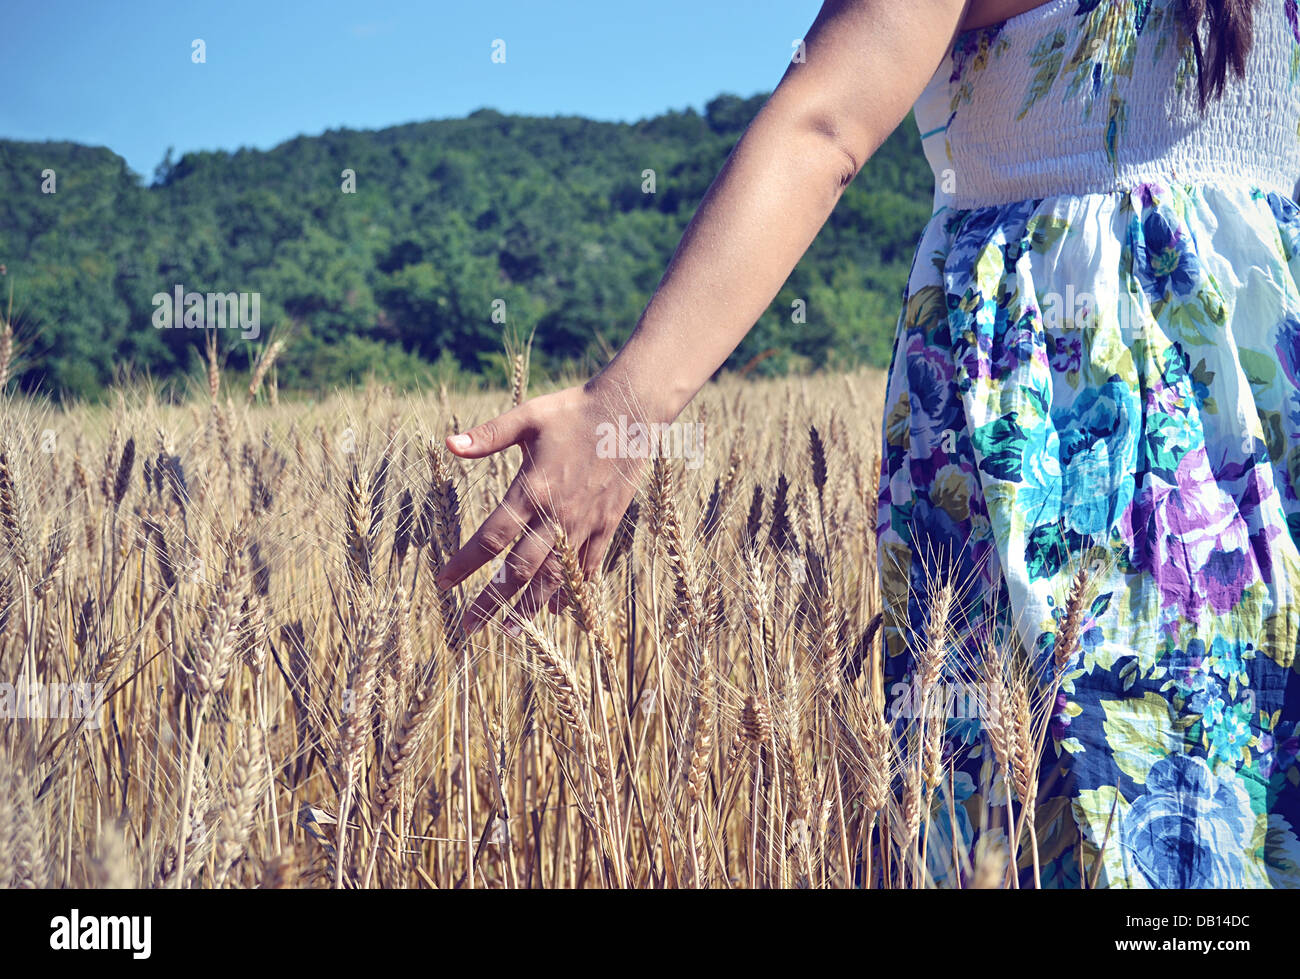 Nature, Human Hand, Women, Wheat, Field, Life, People, Environment, Food, Crop, Protection, Love, Agriculture, Sunset Stock Photo